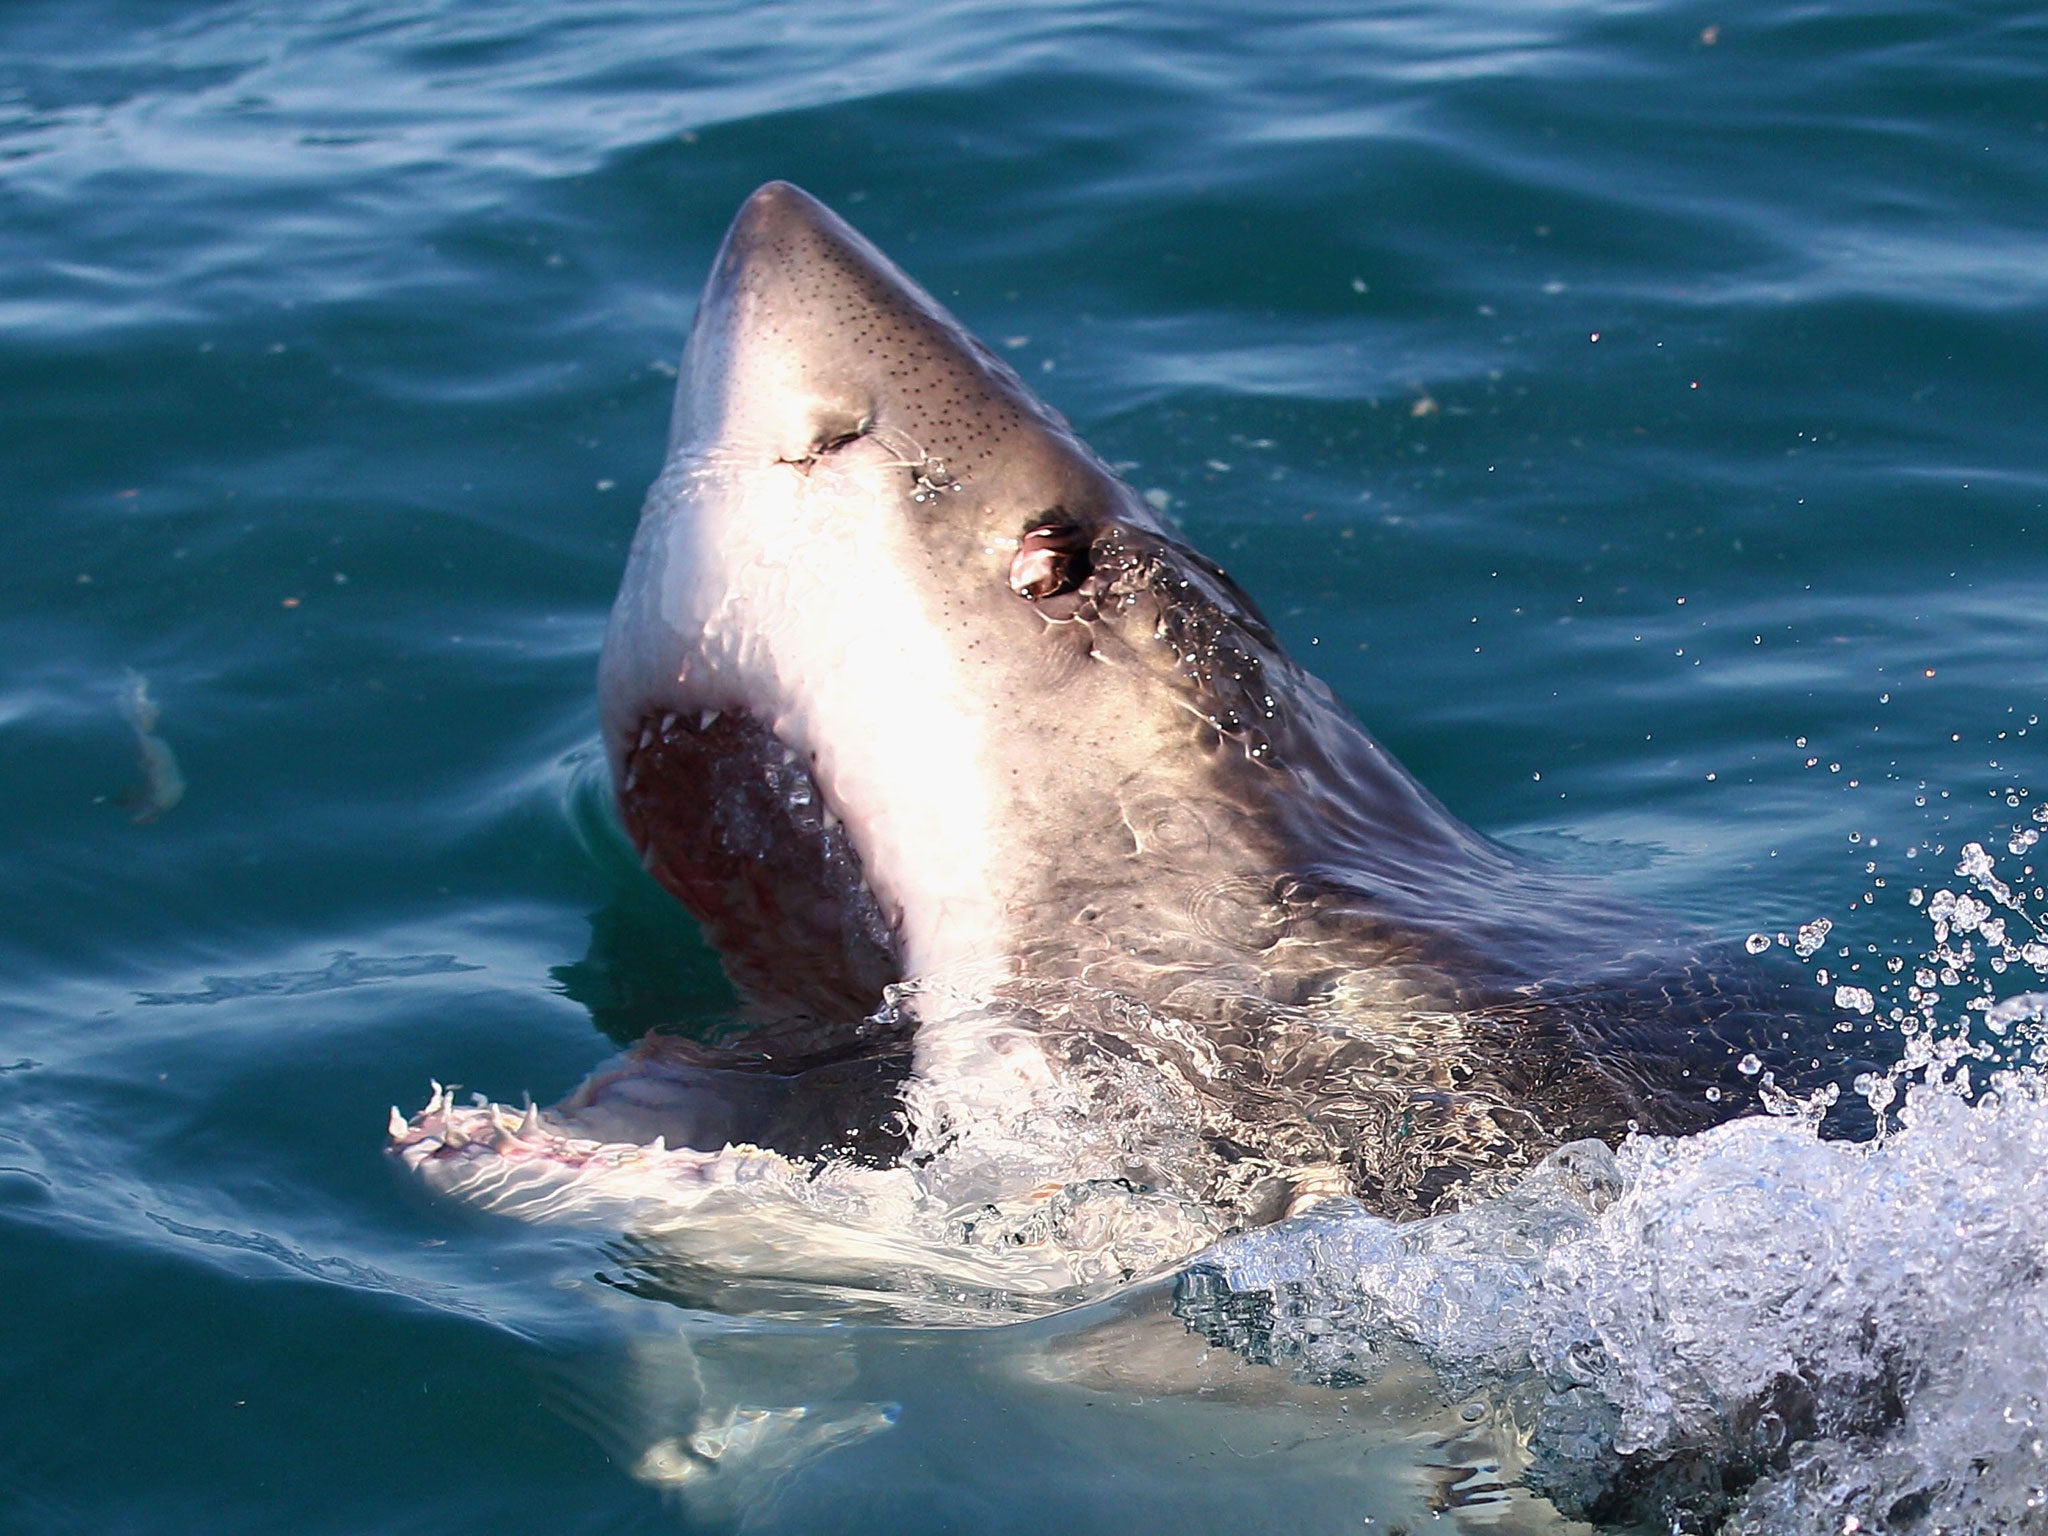 File: The Ocearch team is on a mission to tag as many great white sharks as possible